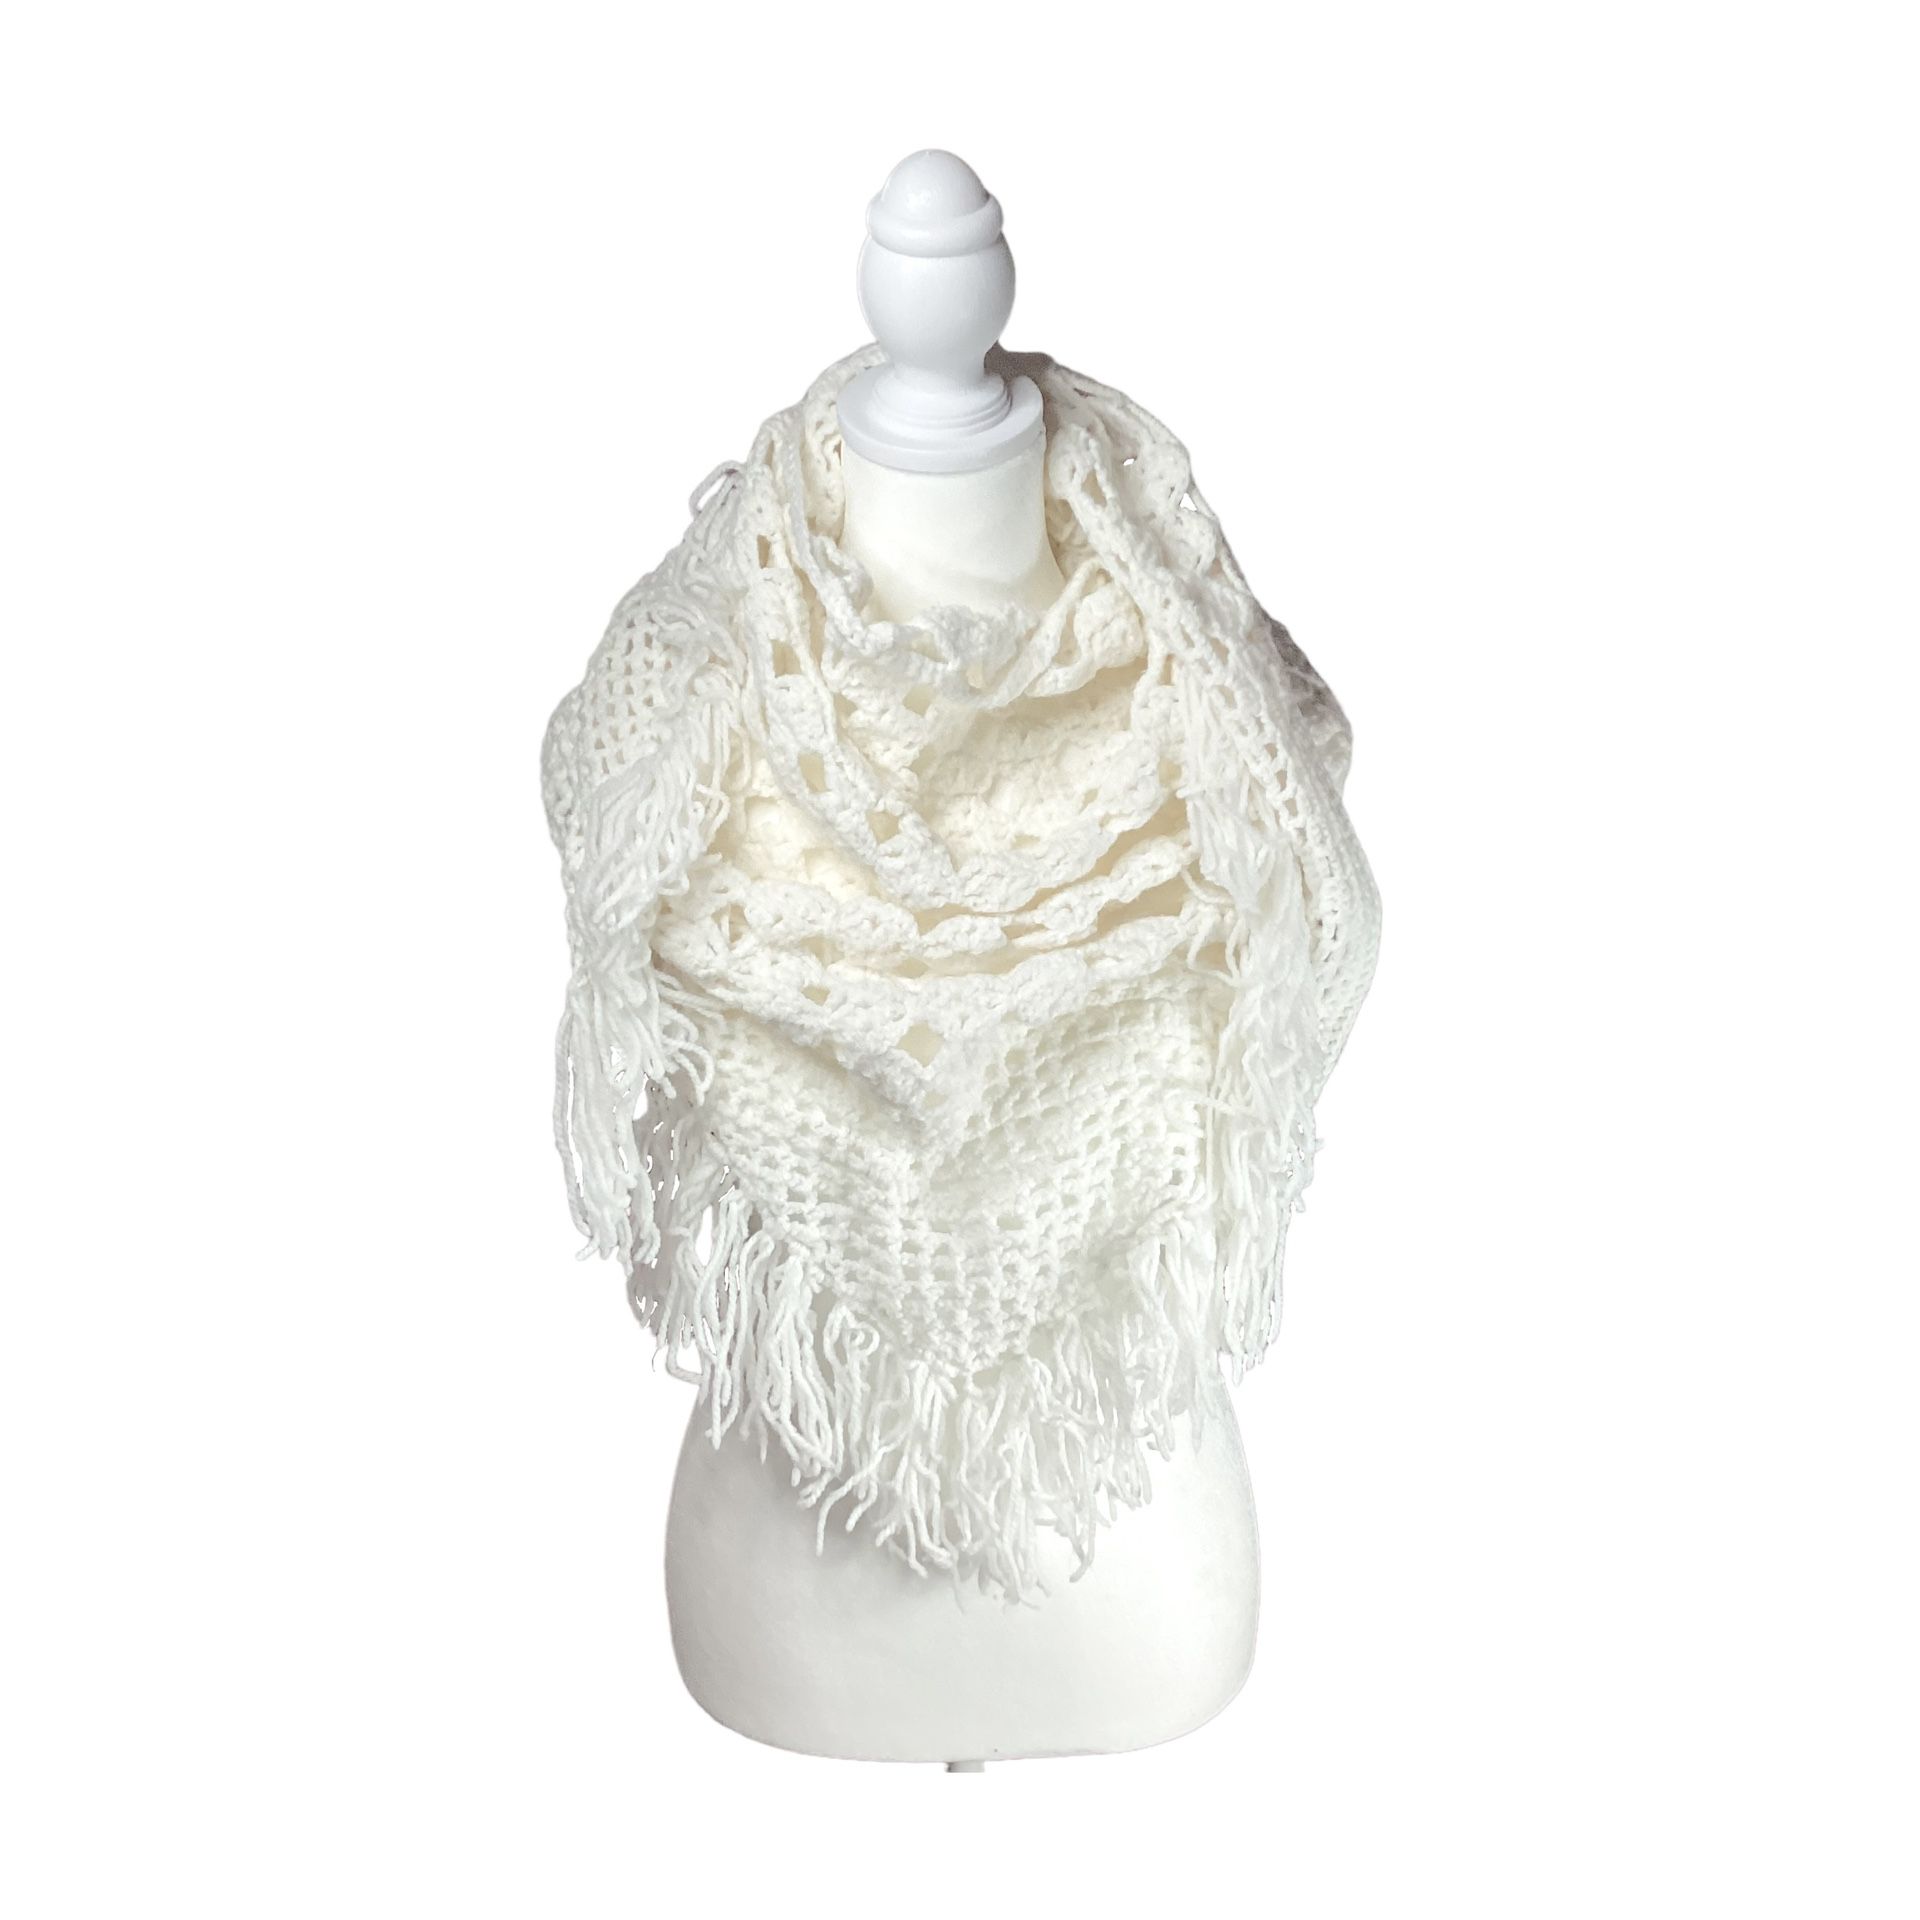 1970s Crocheted Fringed Shawl Wrap, 68 in, White Scarf With Fringes, Open Knit, Triangular Shape, Boho Hippie Gypsy Style